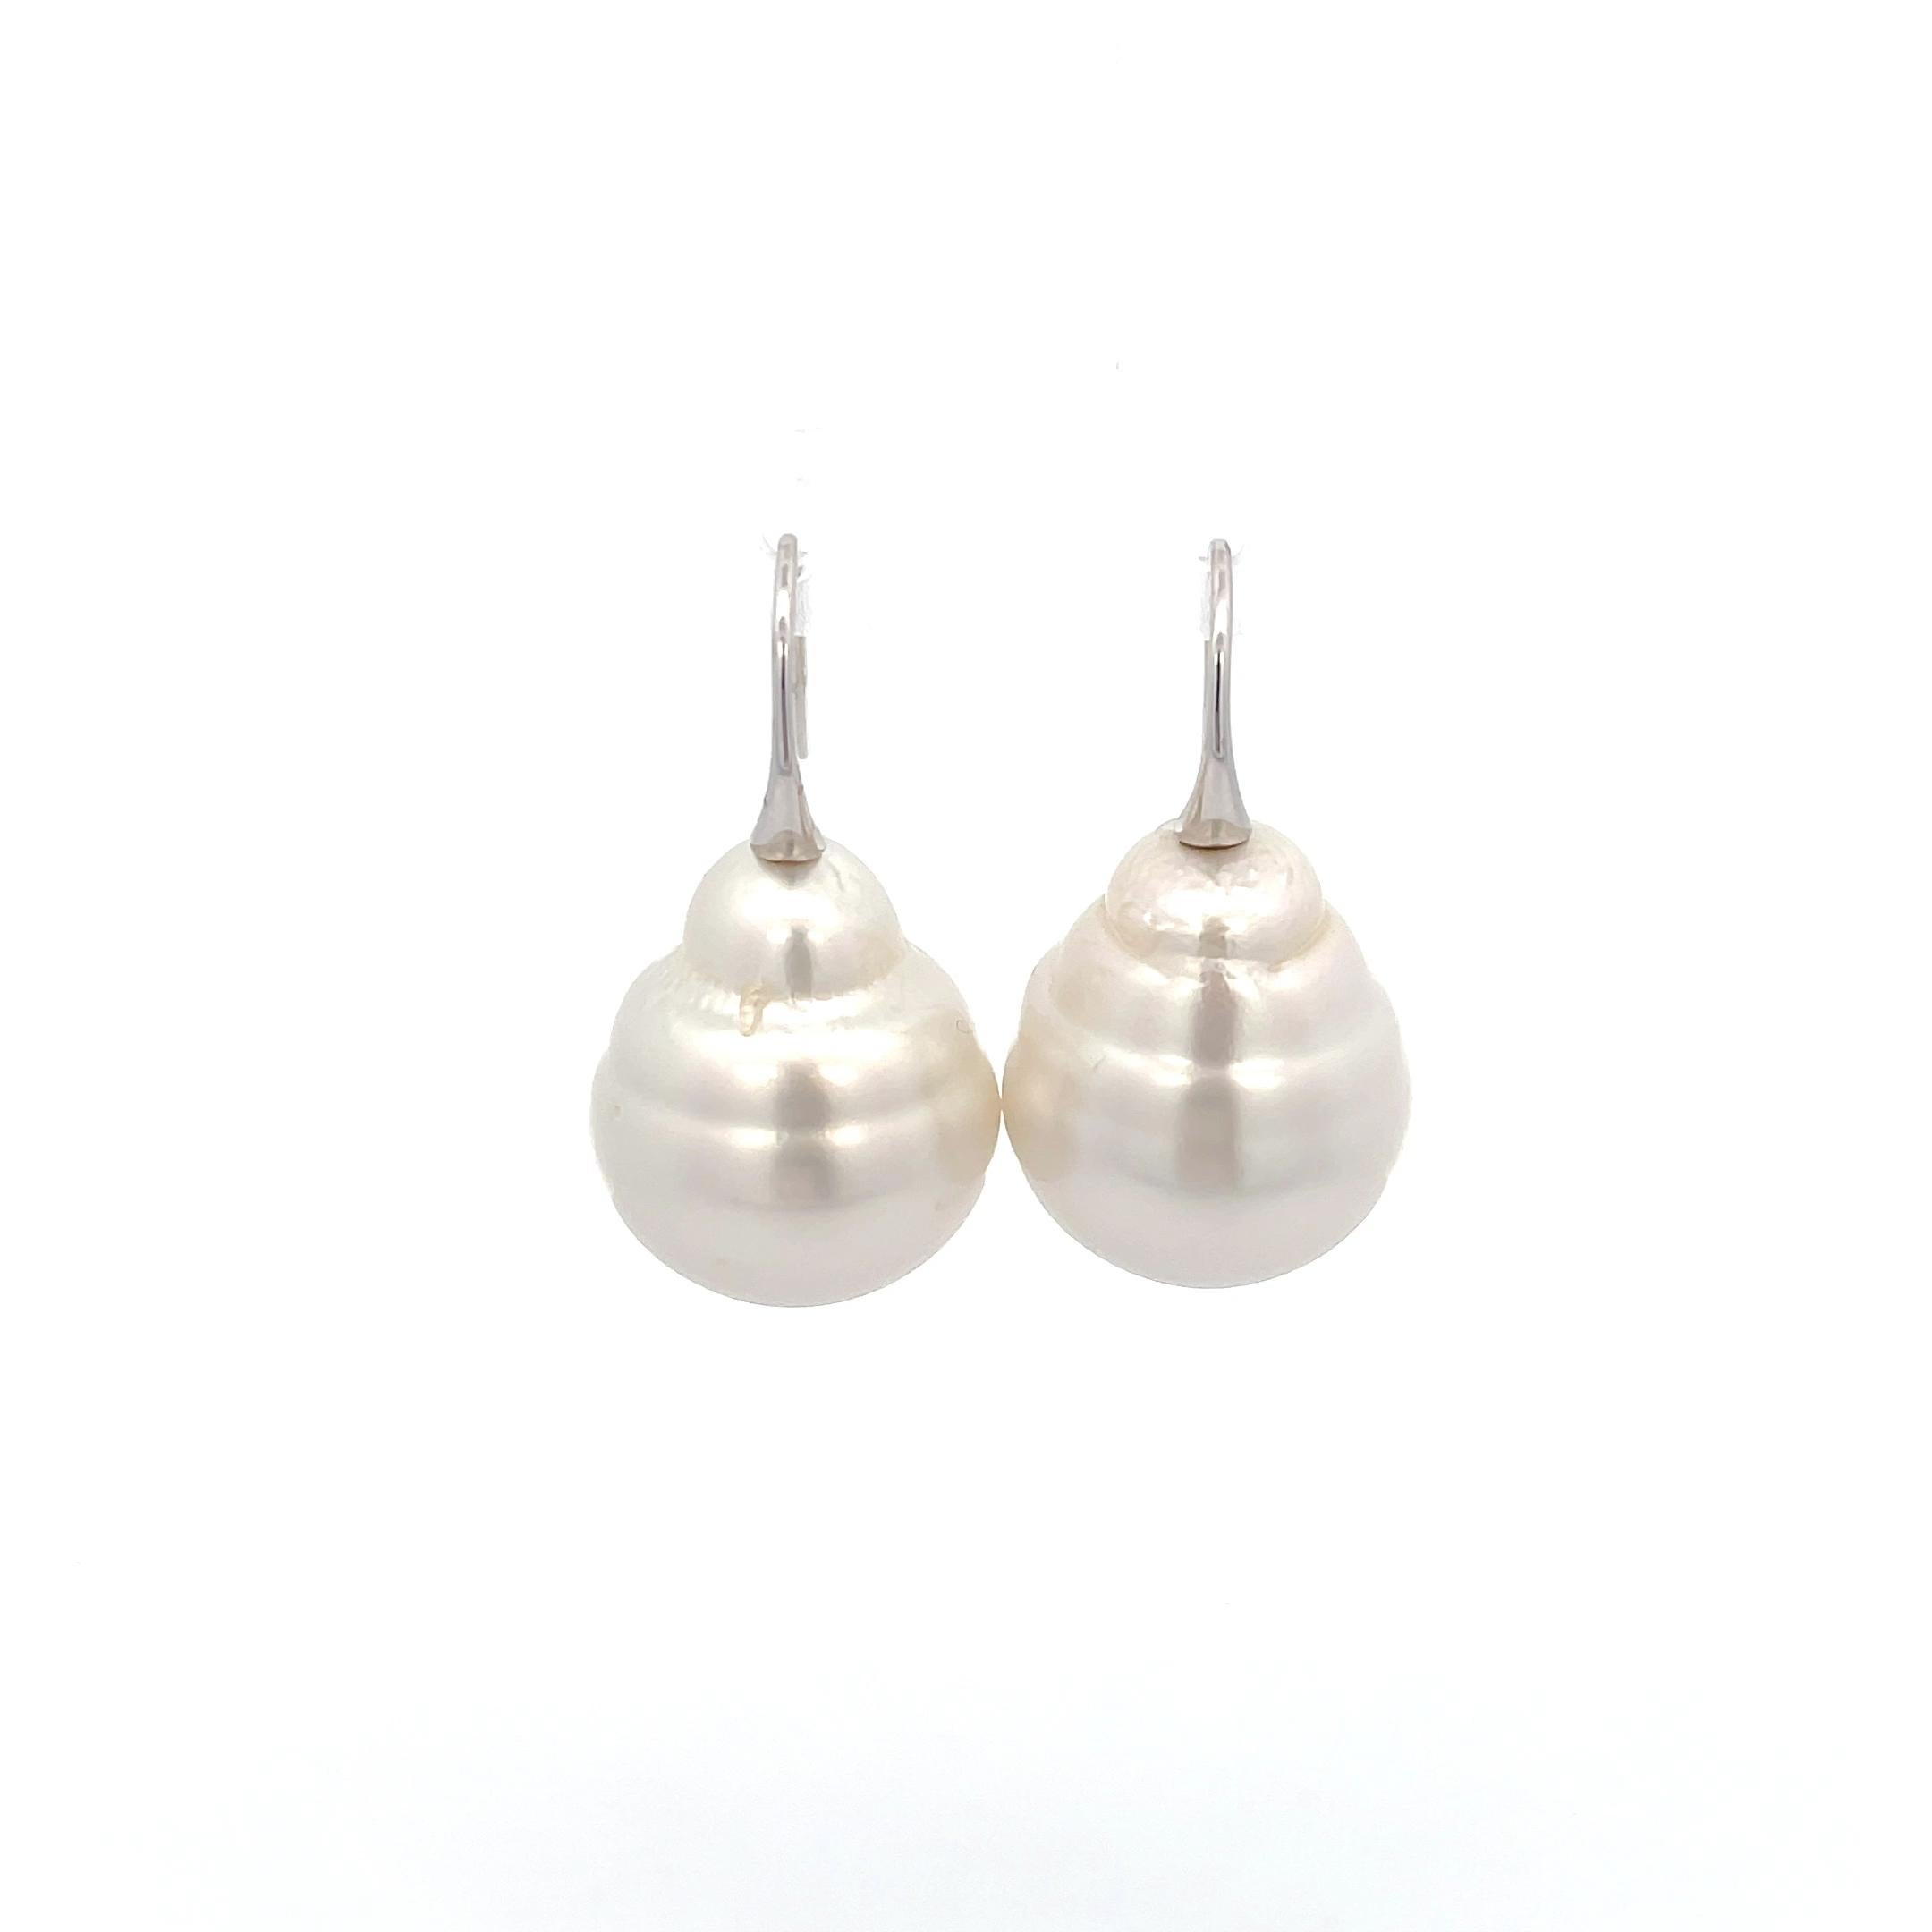 Autore Baroque South Sea Pearls in 18K White Gold. The pearls are approximately 16mm.
1